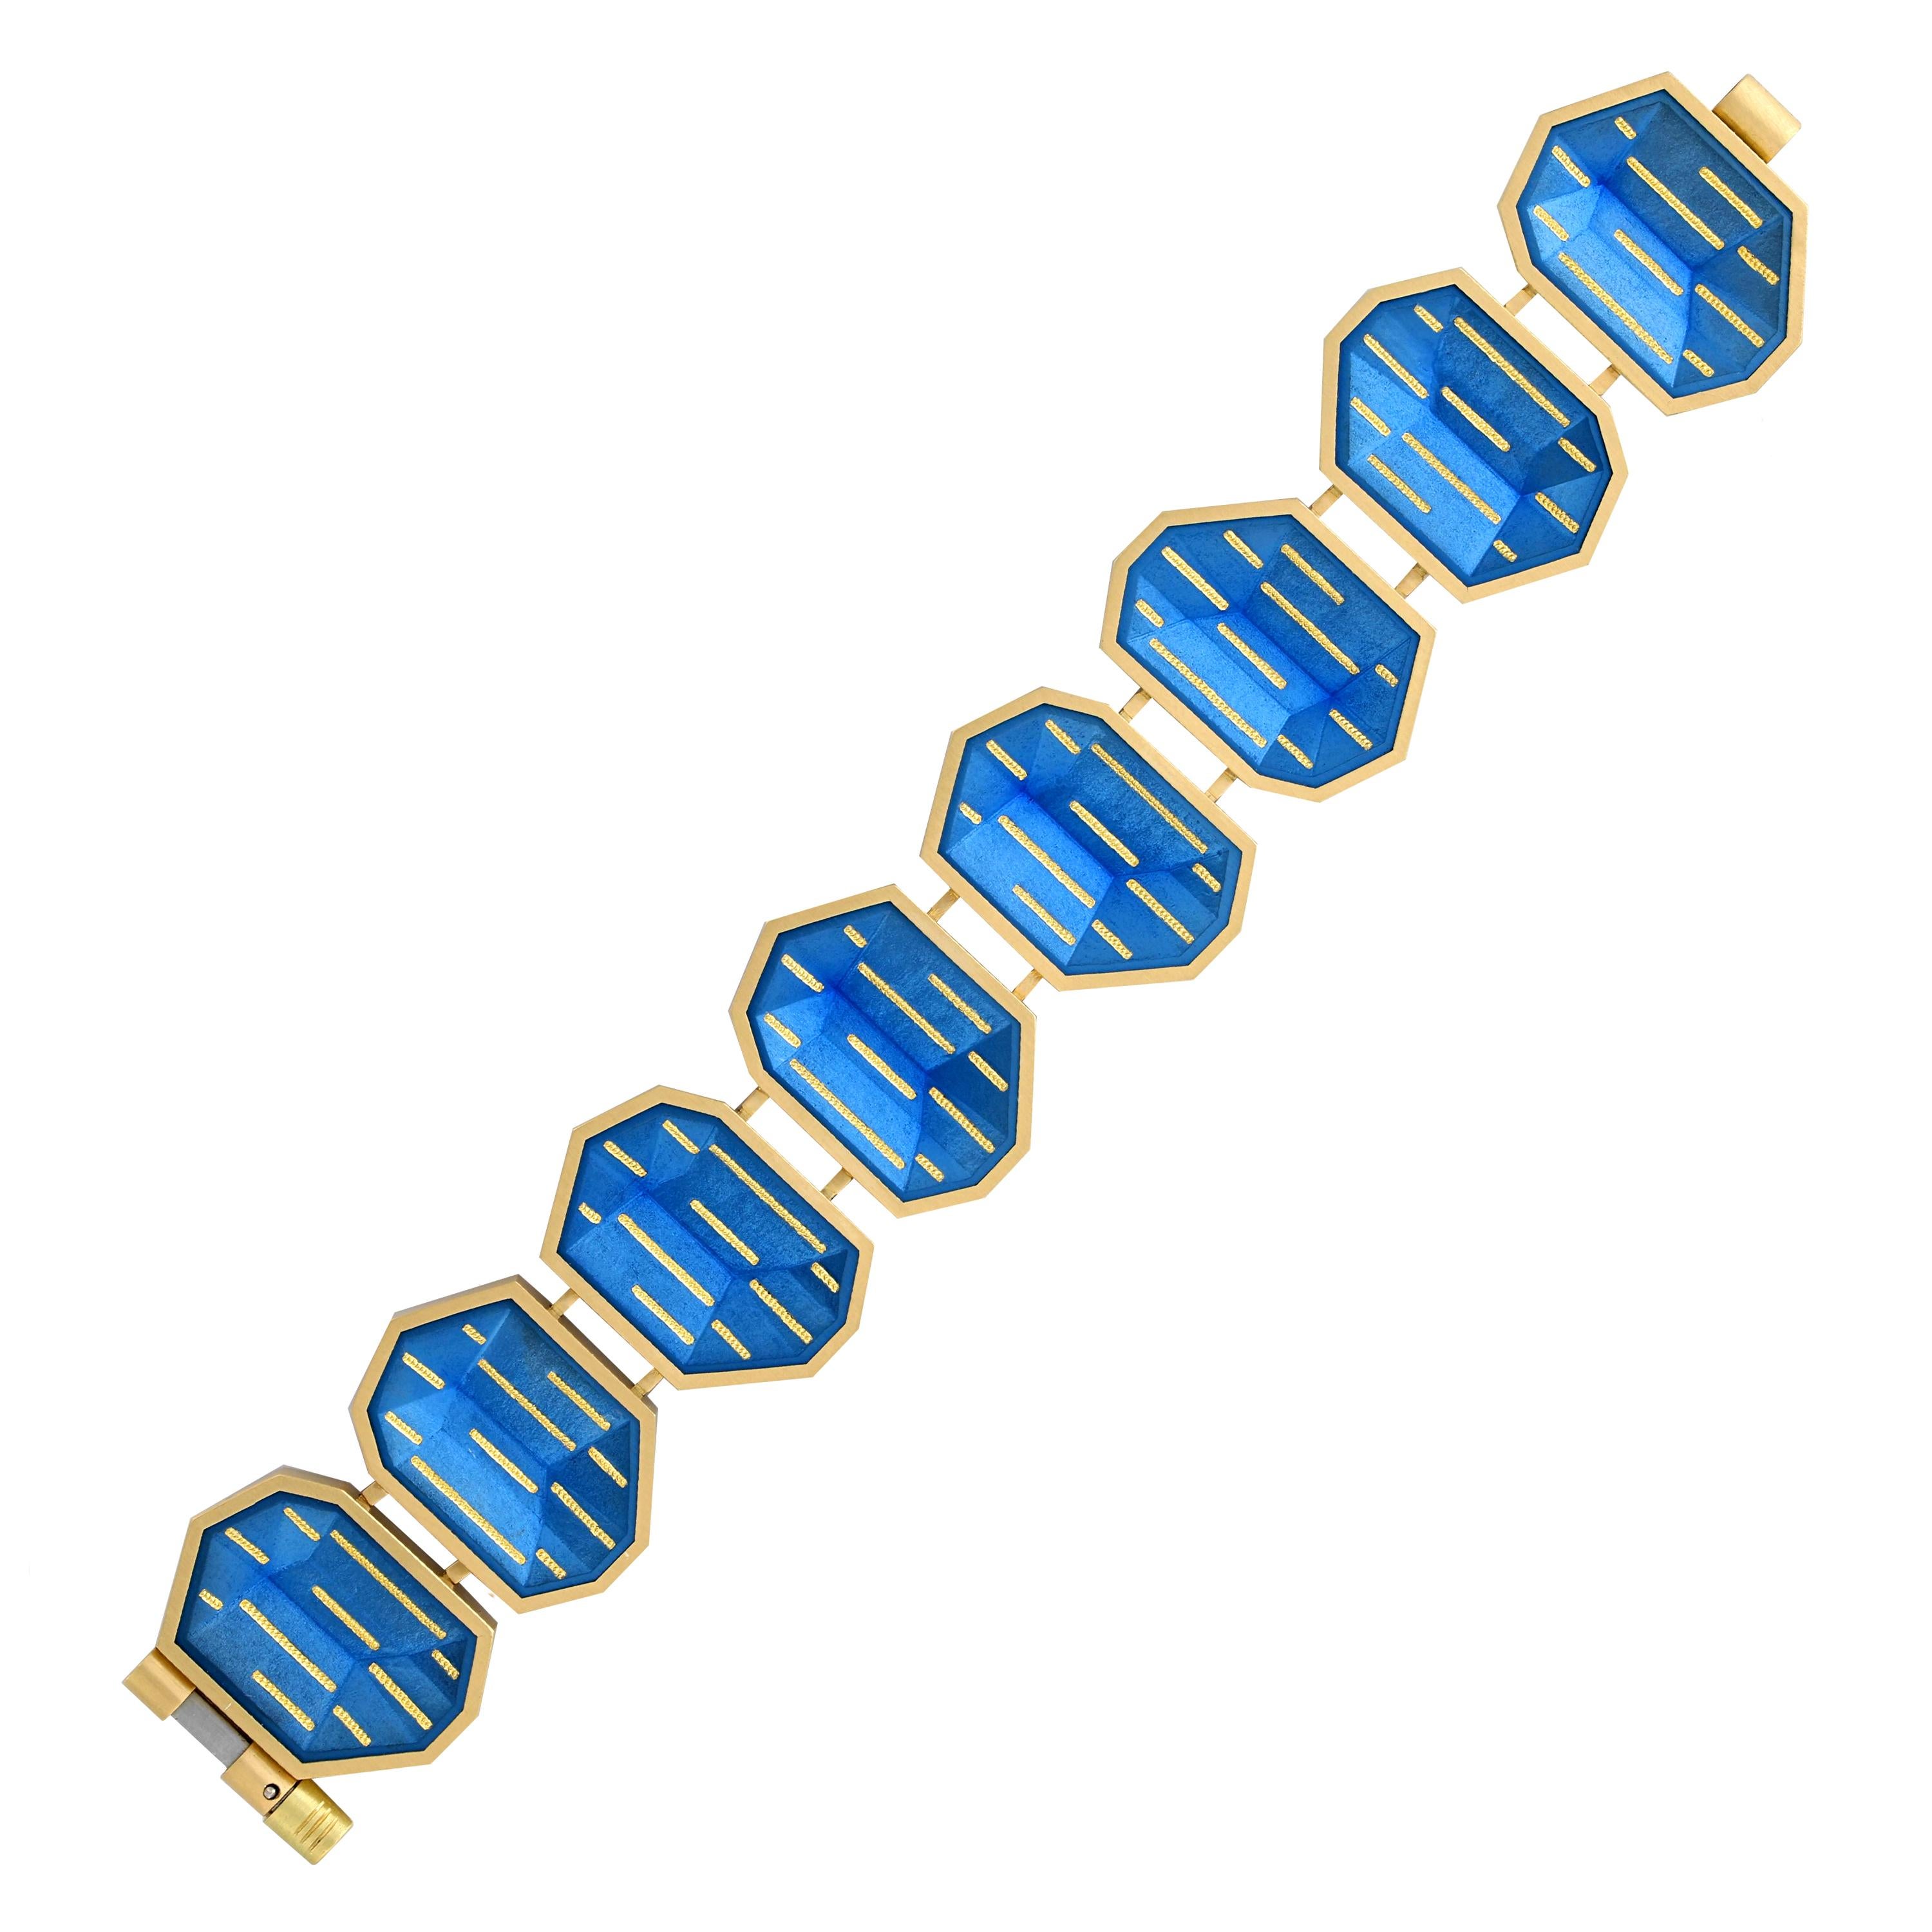 Contemporary Geometric Cobalt Blue Steel and Gold bracelet by Zoltan David For Sale